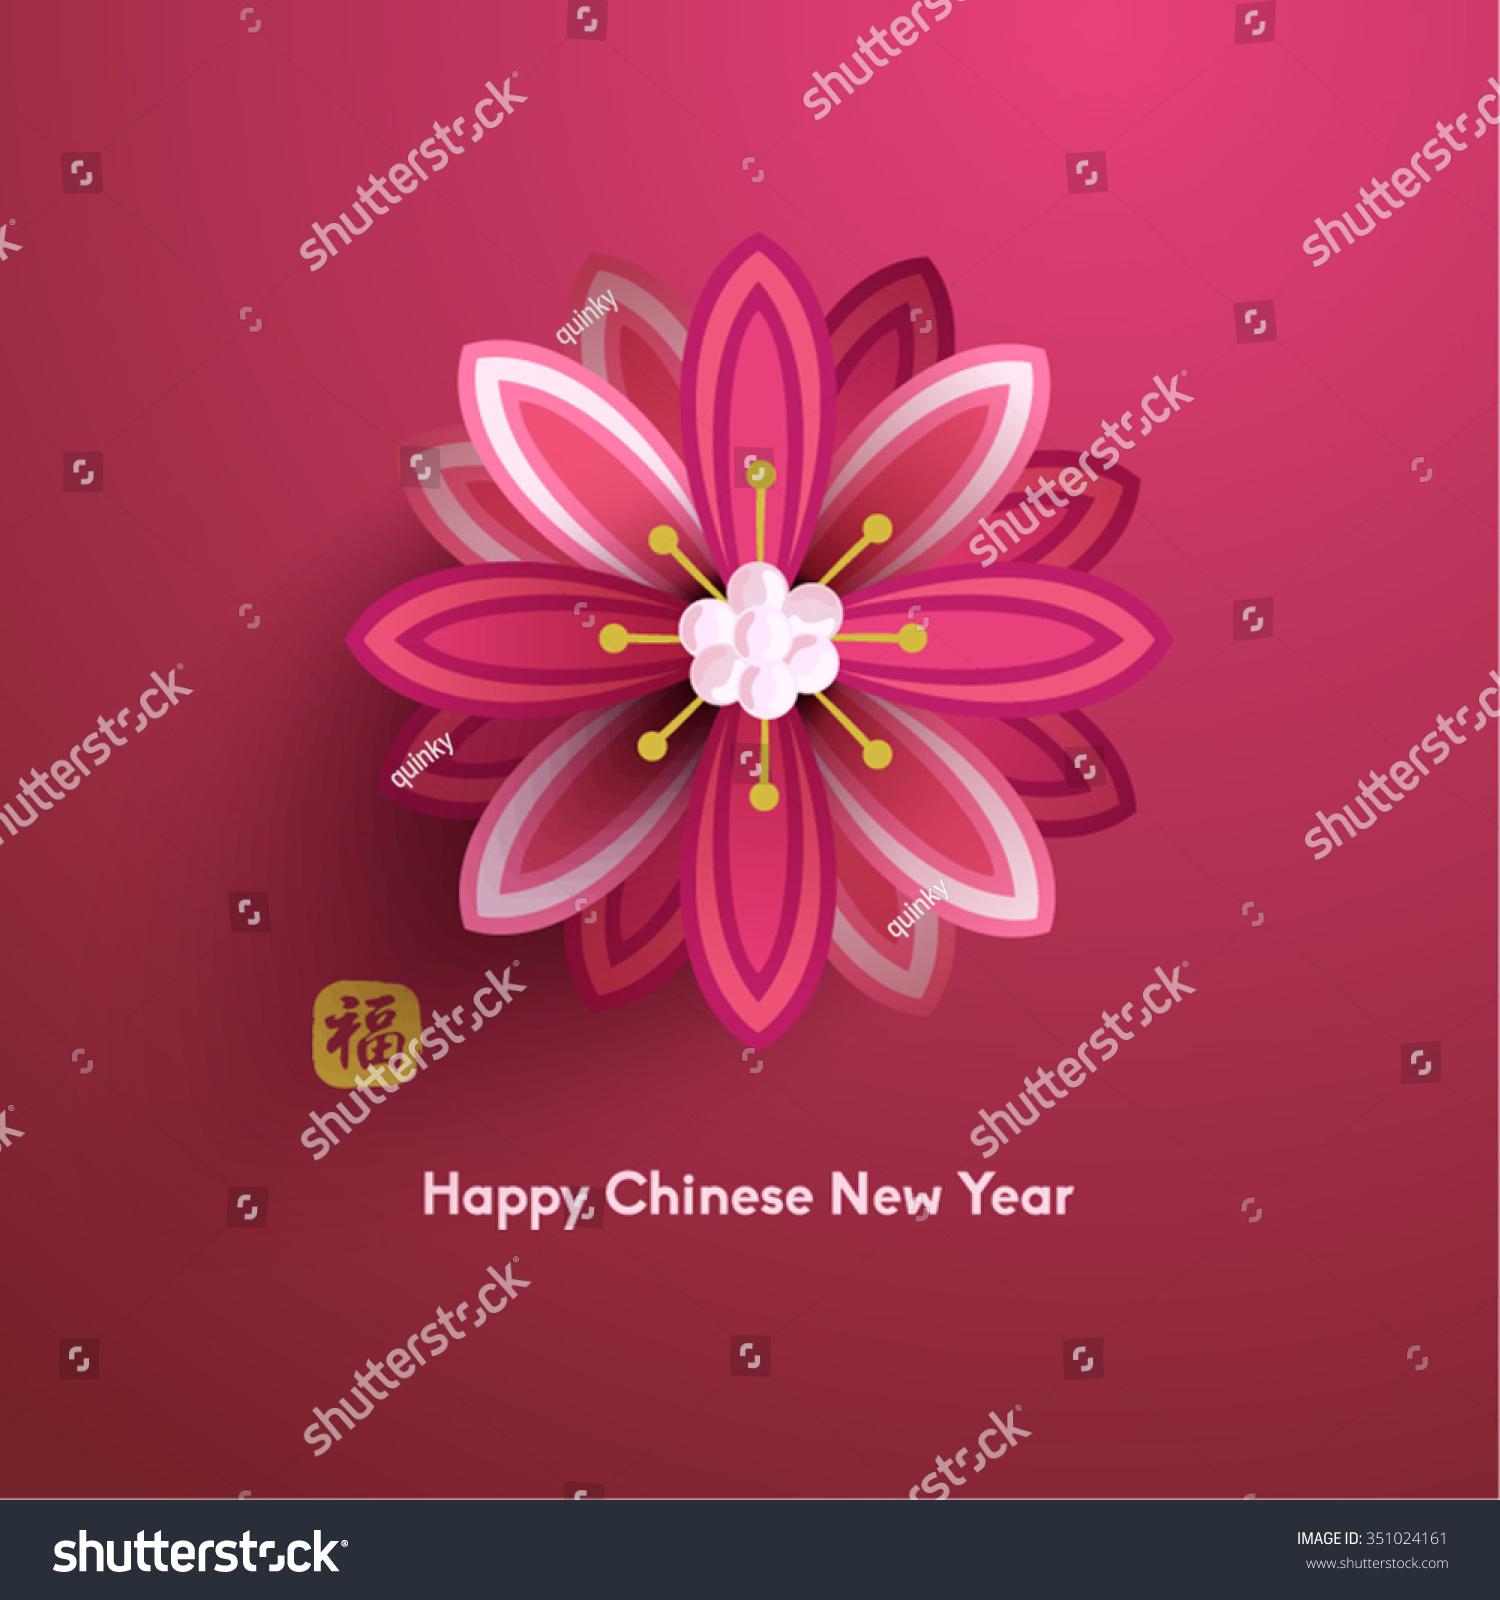 Chinese New Year Blooming Flower Vector Stock Vector 351024161 ...